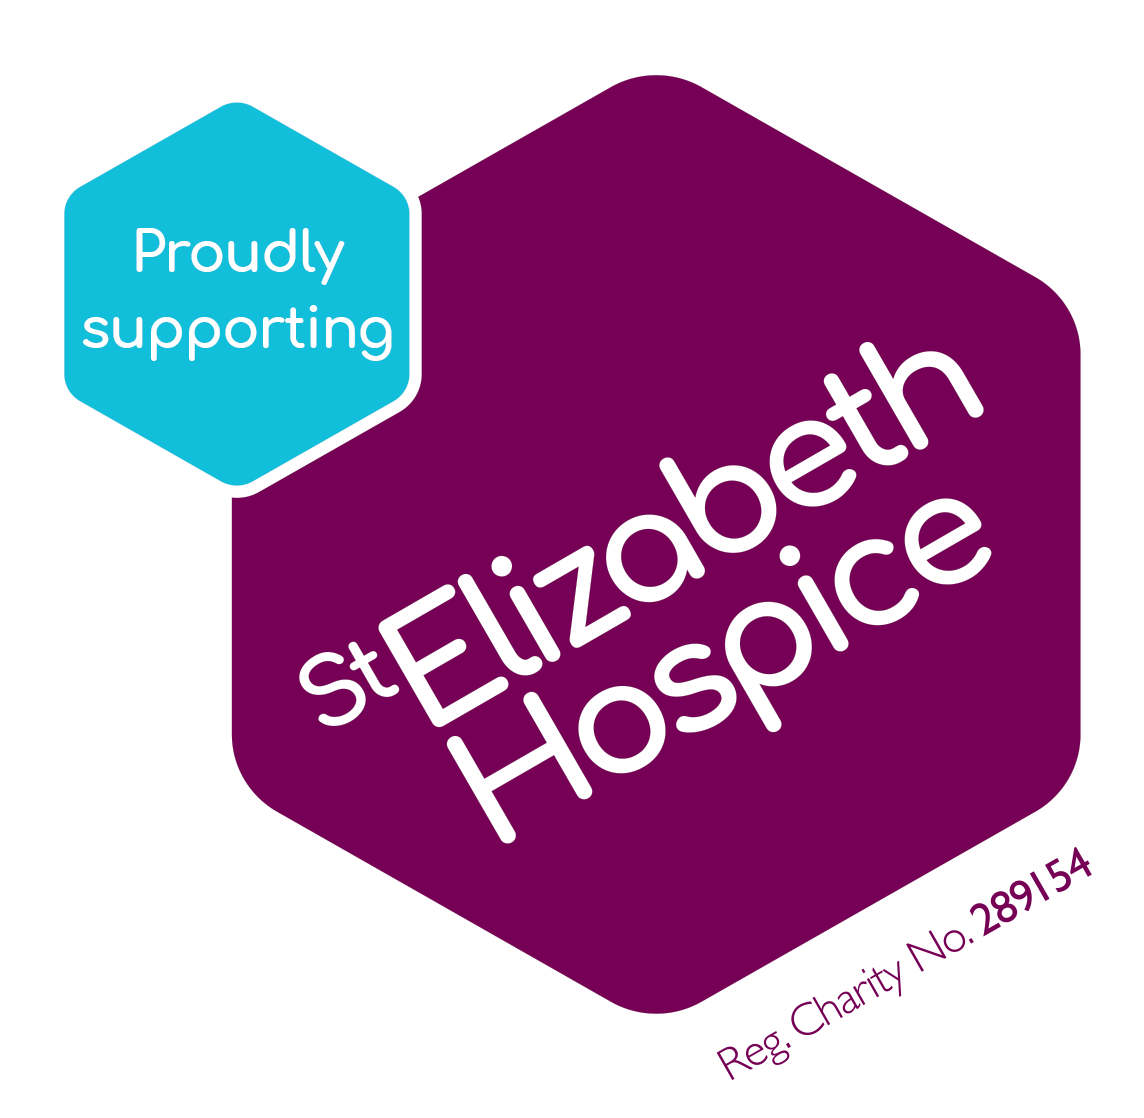 Proudly supporting St Elizabeth Hospice